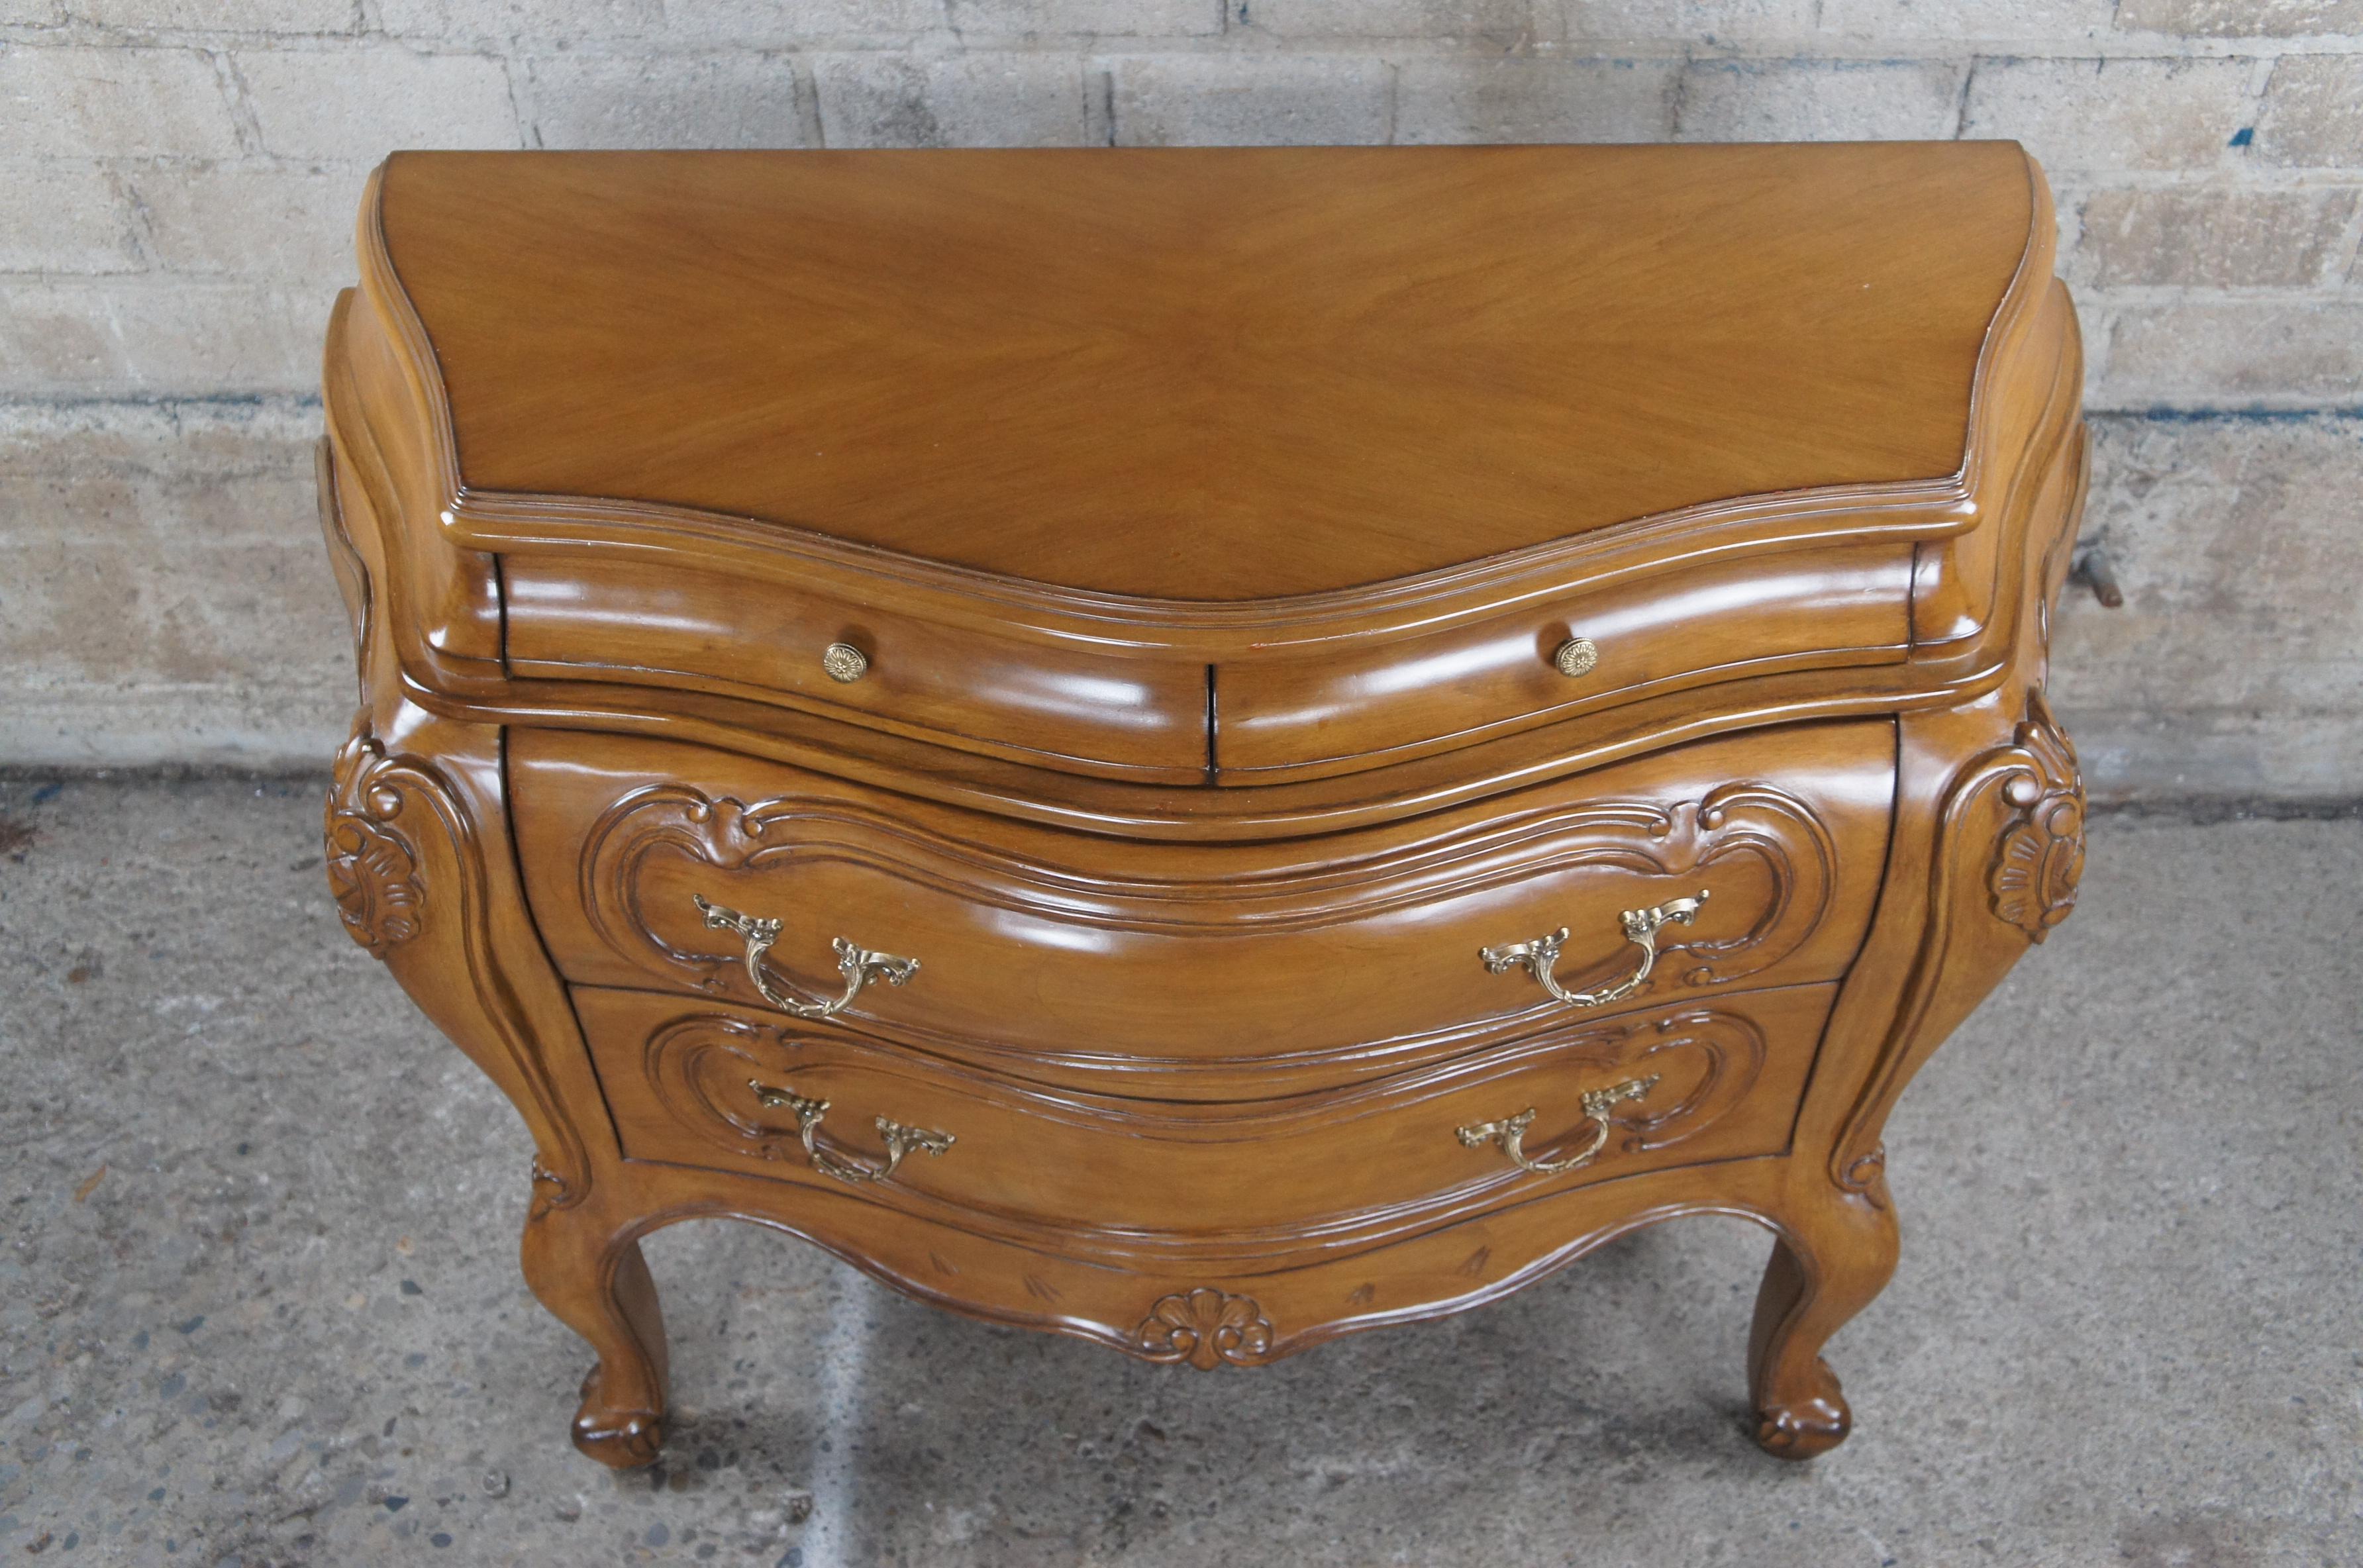 2 Vintage Italian Walnut Serpentine Bow Front Bombe Chests Commodes Nightstands In Good Condition For Sale In Dayton, OH